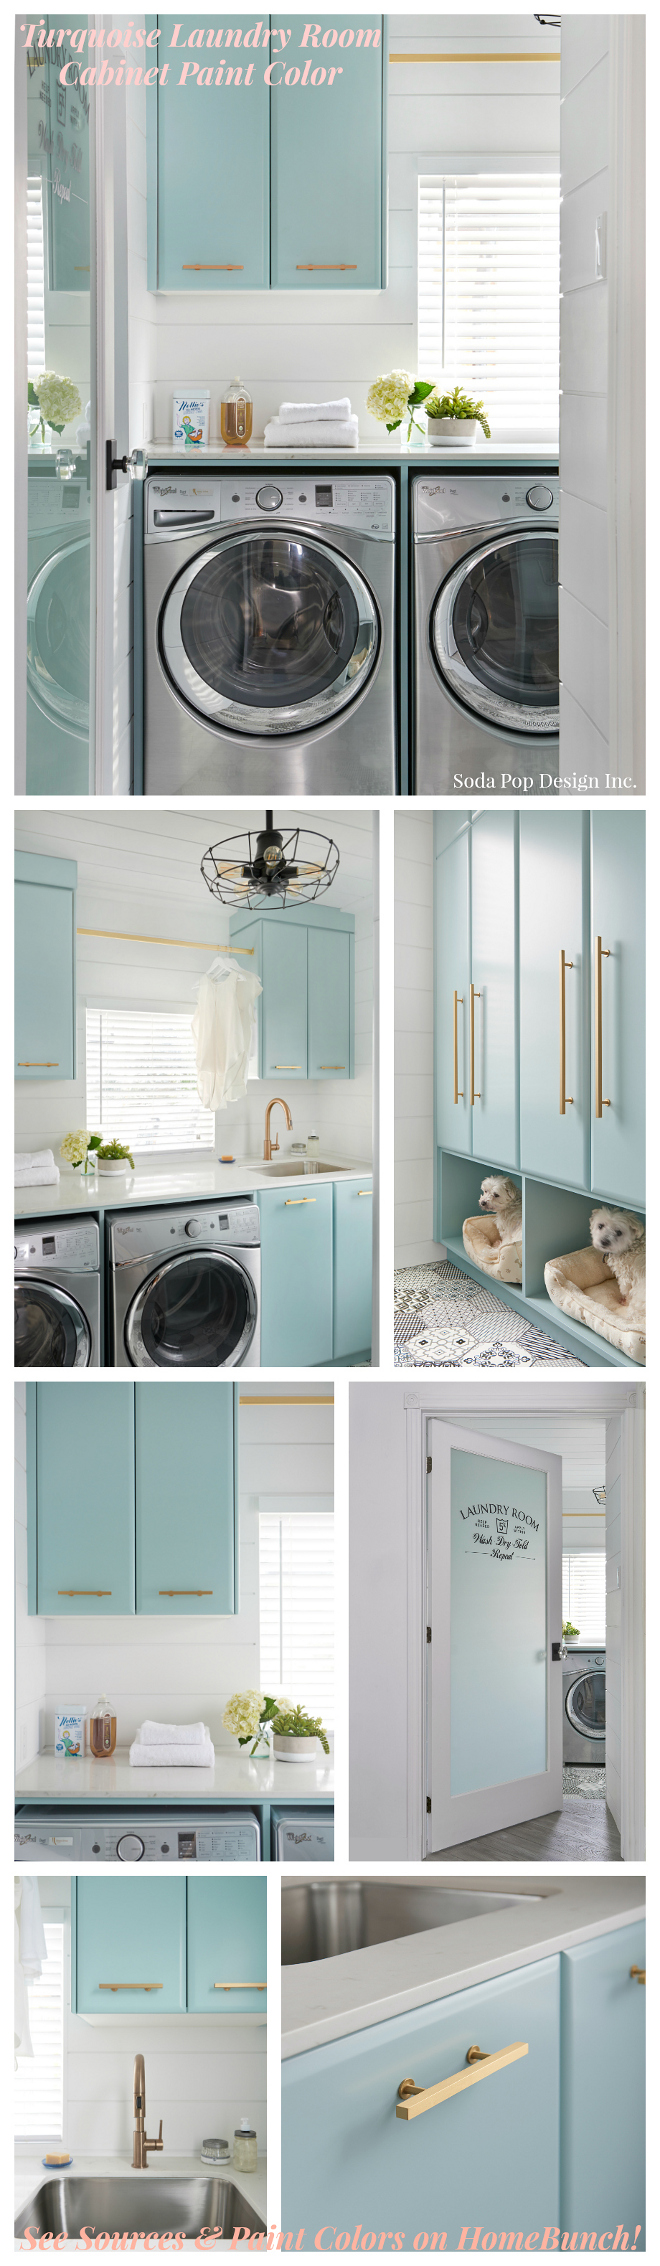 Turquoise Laundry Room Cabinet Paint Color. See Sources and Paint Color on Home Bunch